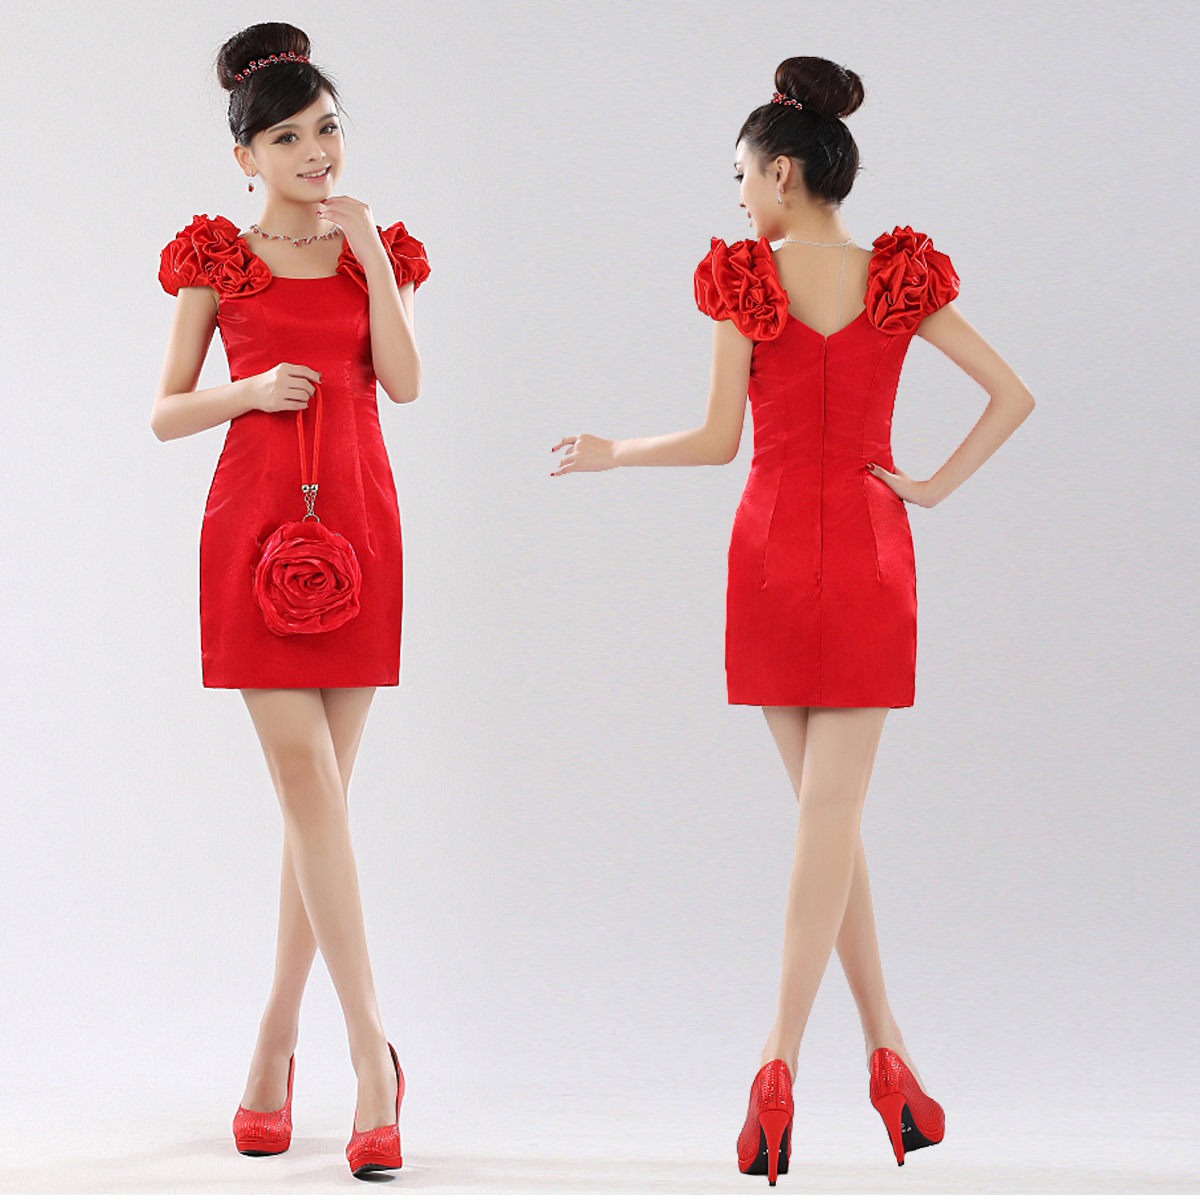 free shipping, The bride red qi in wedding married star evening dress l-063